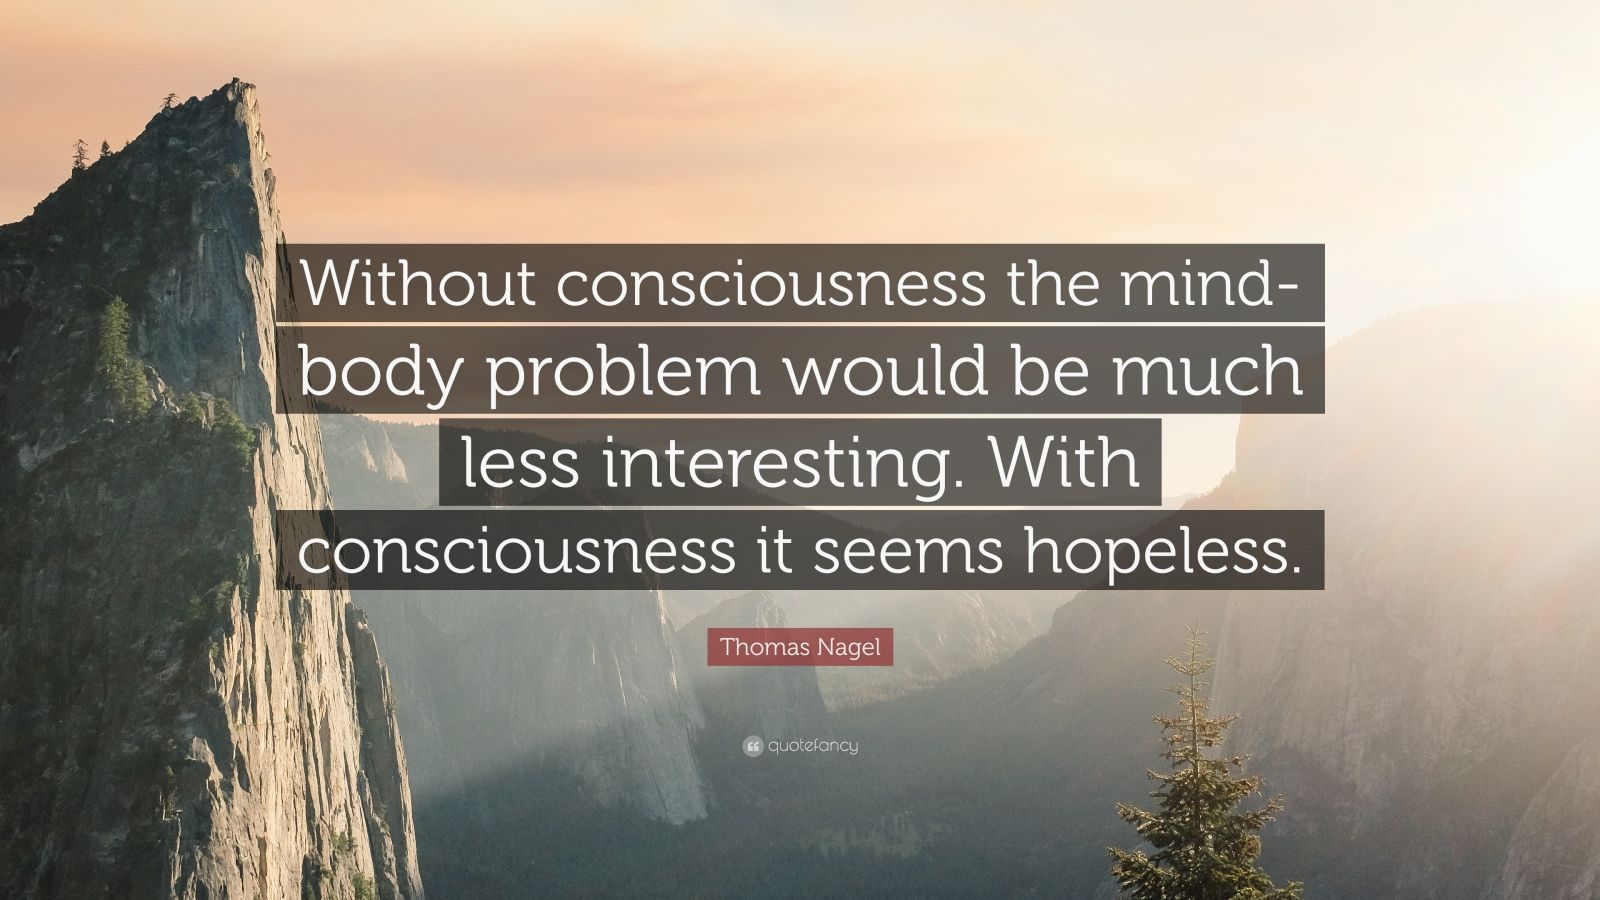 Thomas Nagel Quote: “Without consciousness the mind-body problem would ...